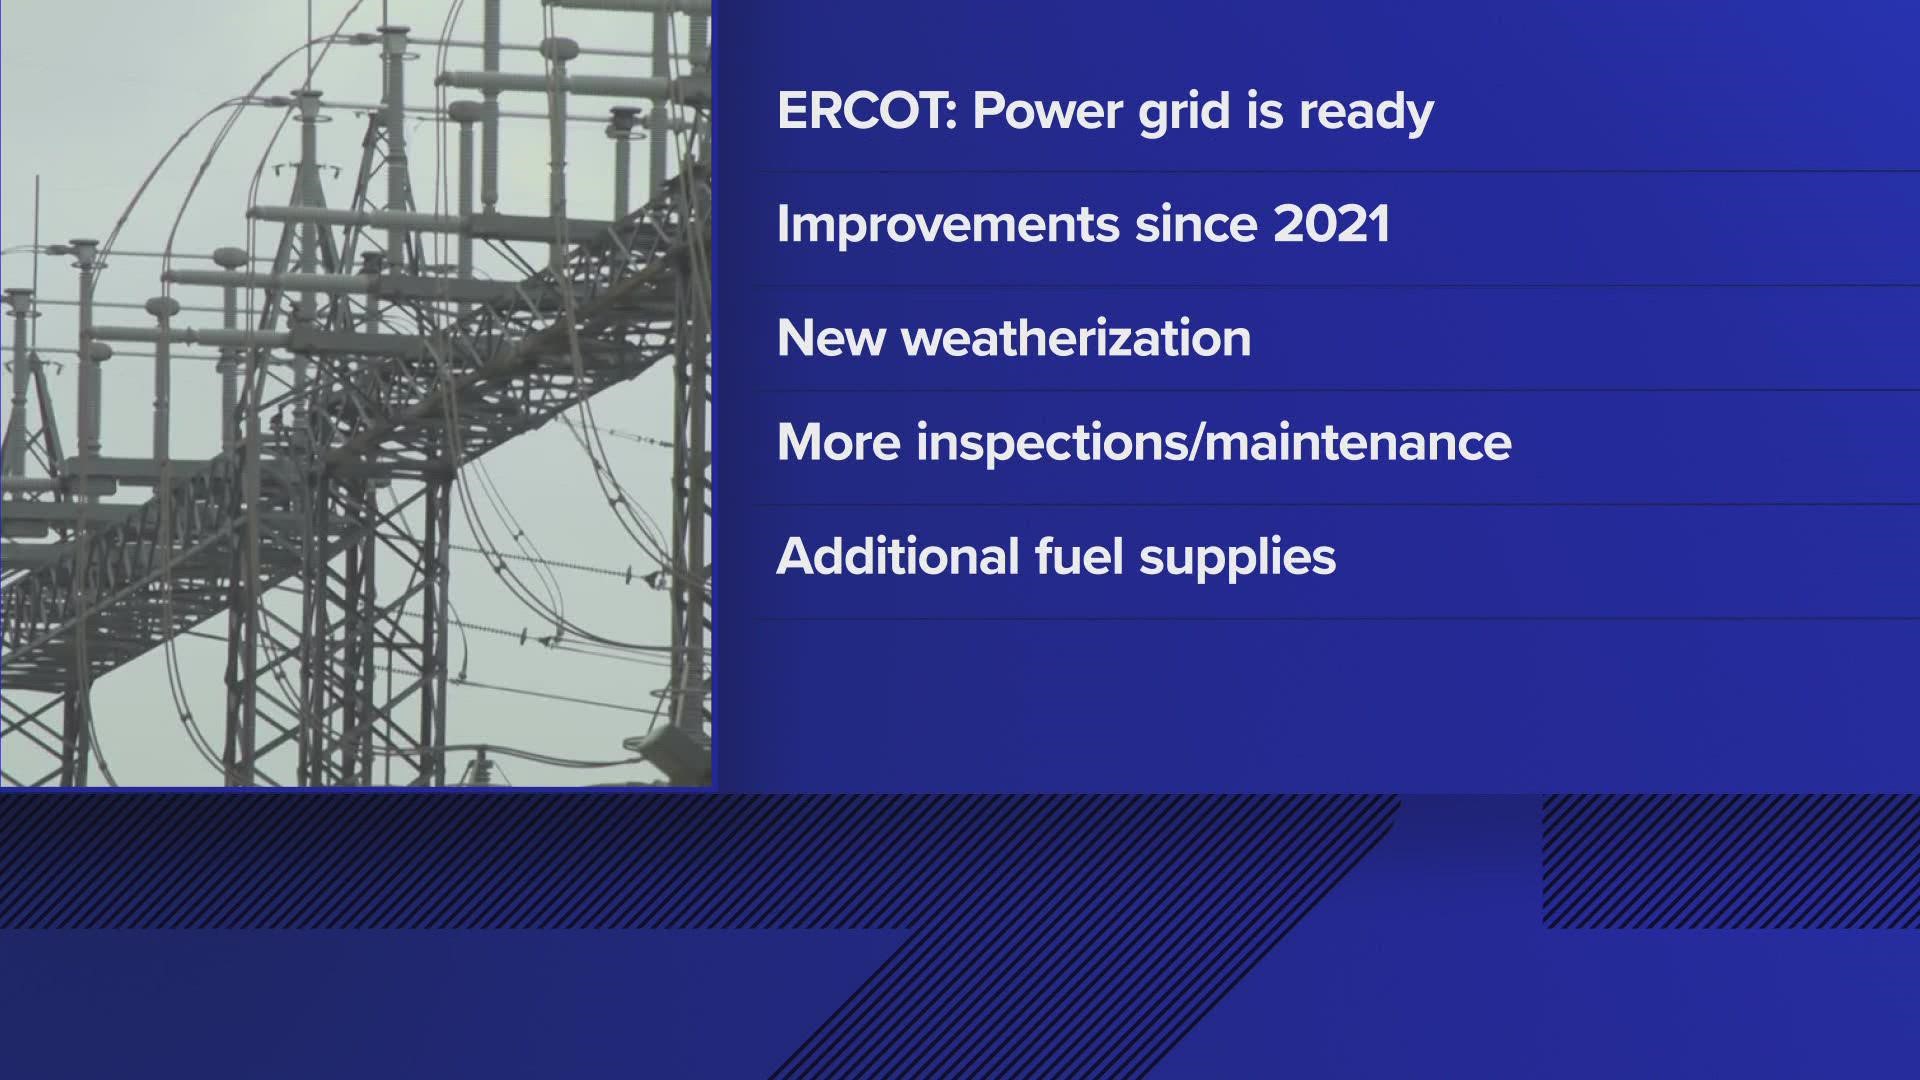 ERCOT says the improvements have been made since the February 2021 winter storm.